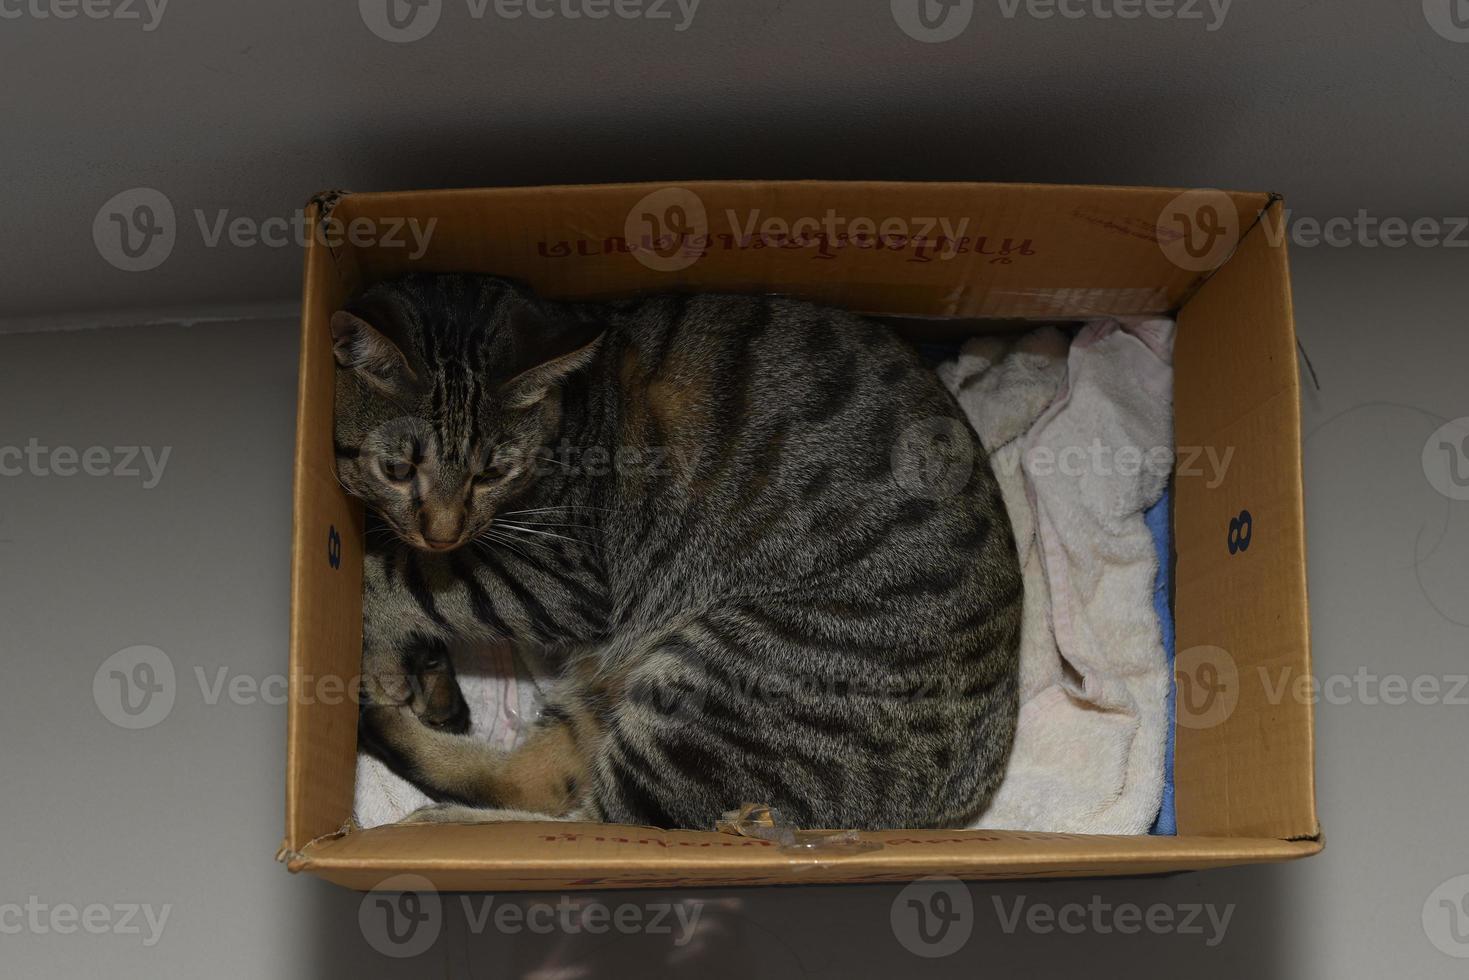 The cat was left in the carton. photo